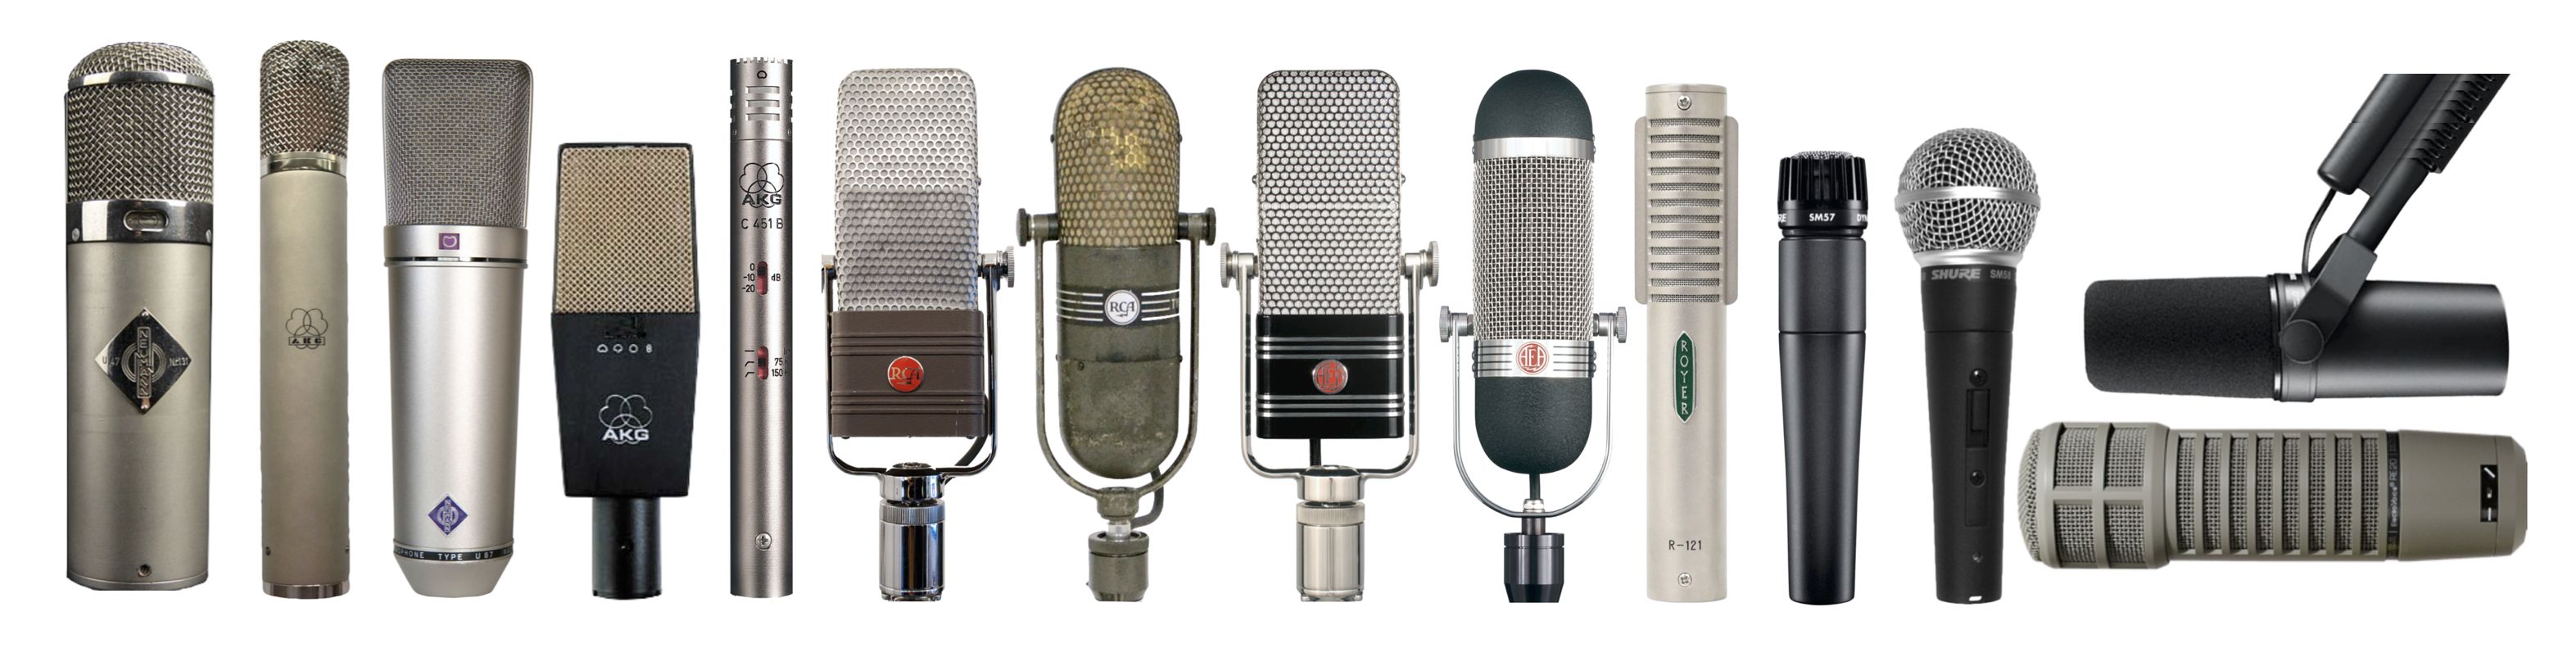 Microphone Types, Features, and Uses